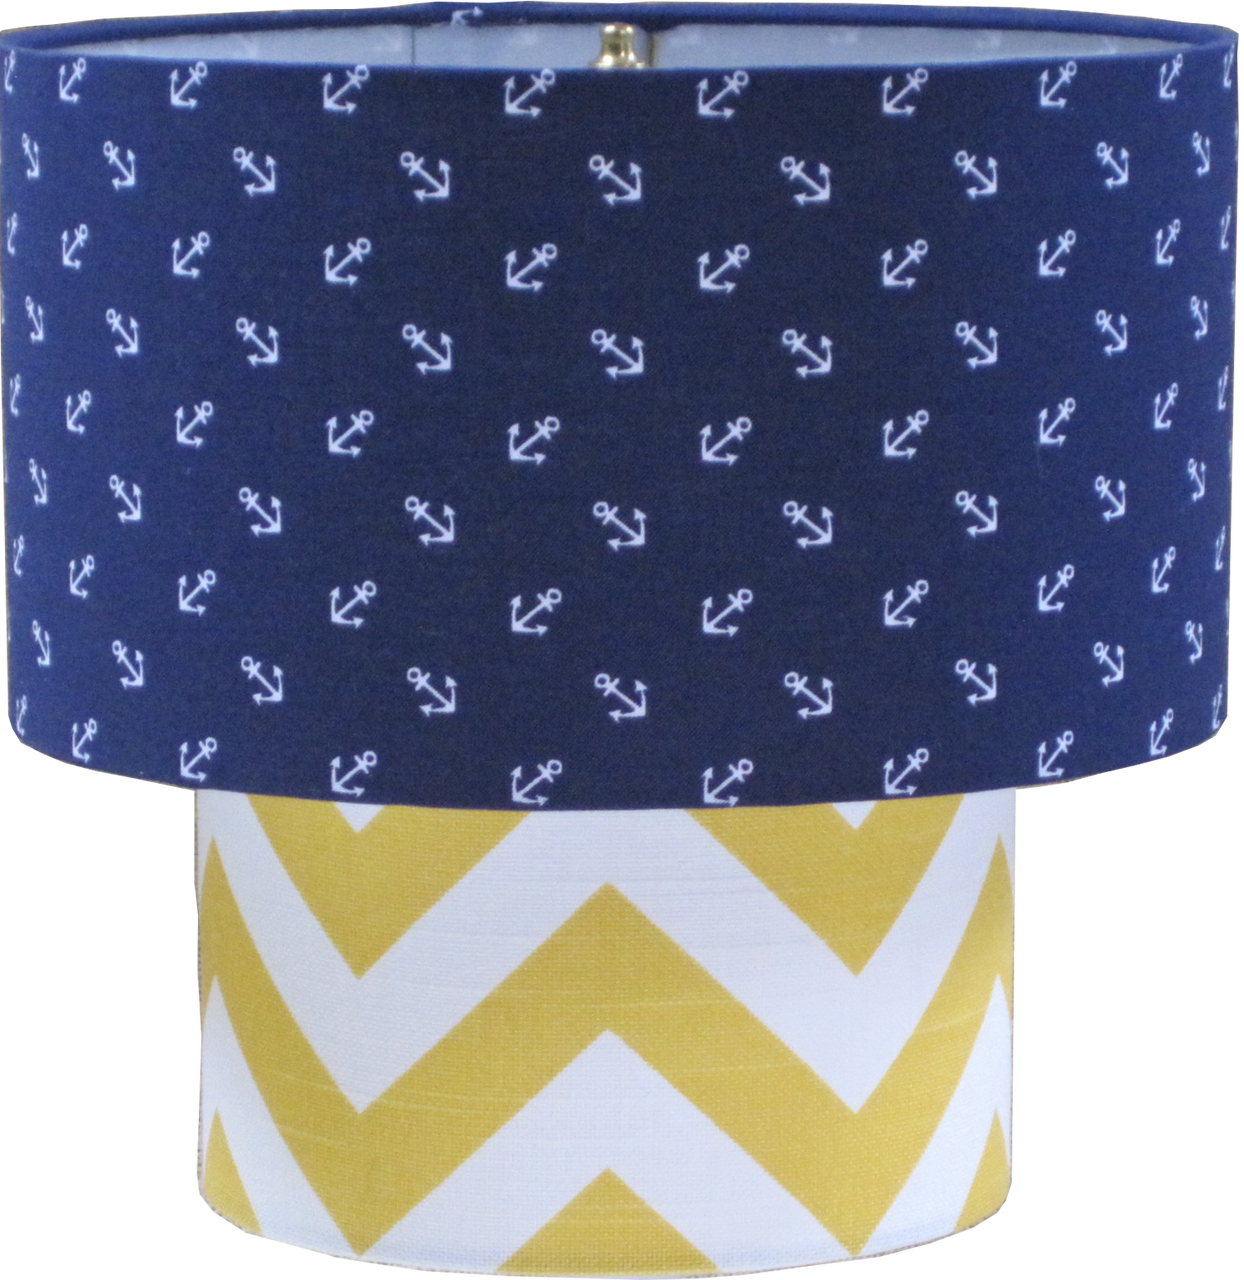 Lampshapescom Nautical Lamp Shade Two Tier Scattered - Rot-und Marine-blau-seeanker-muster Babydecke (1244x1280)